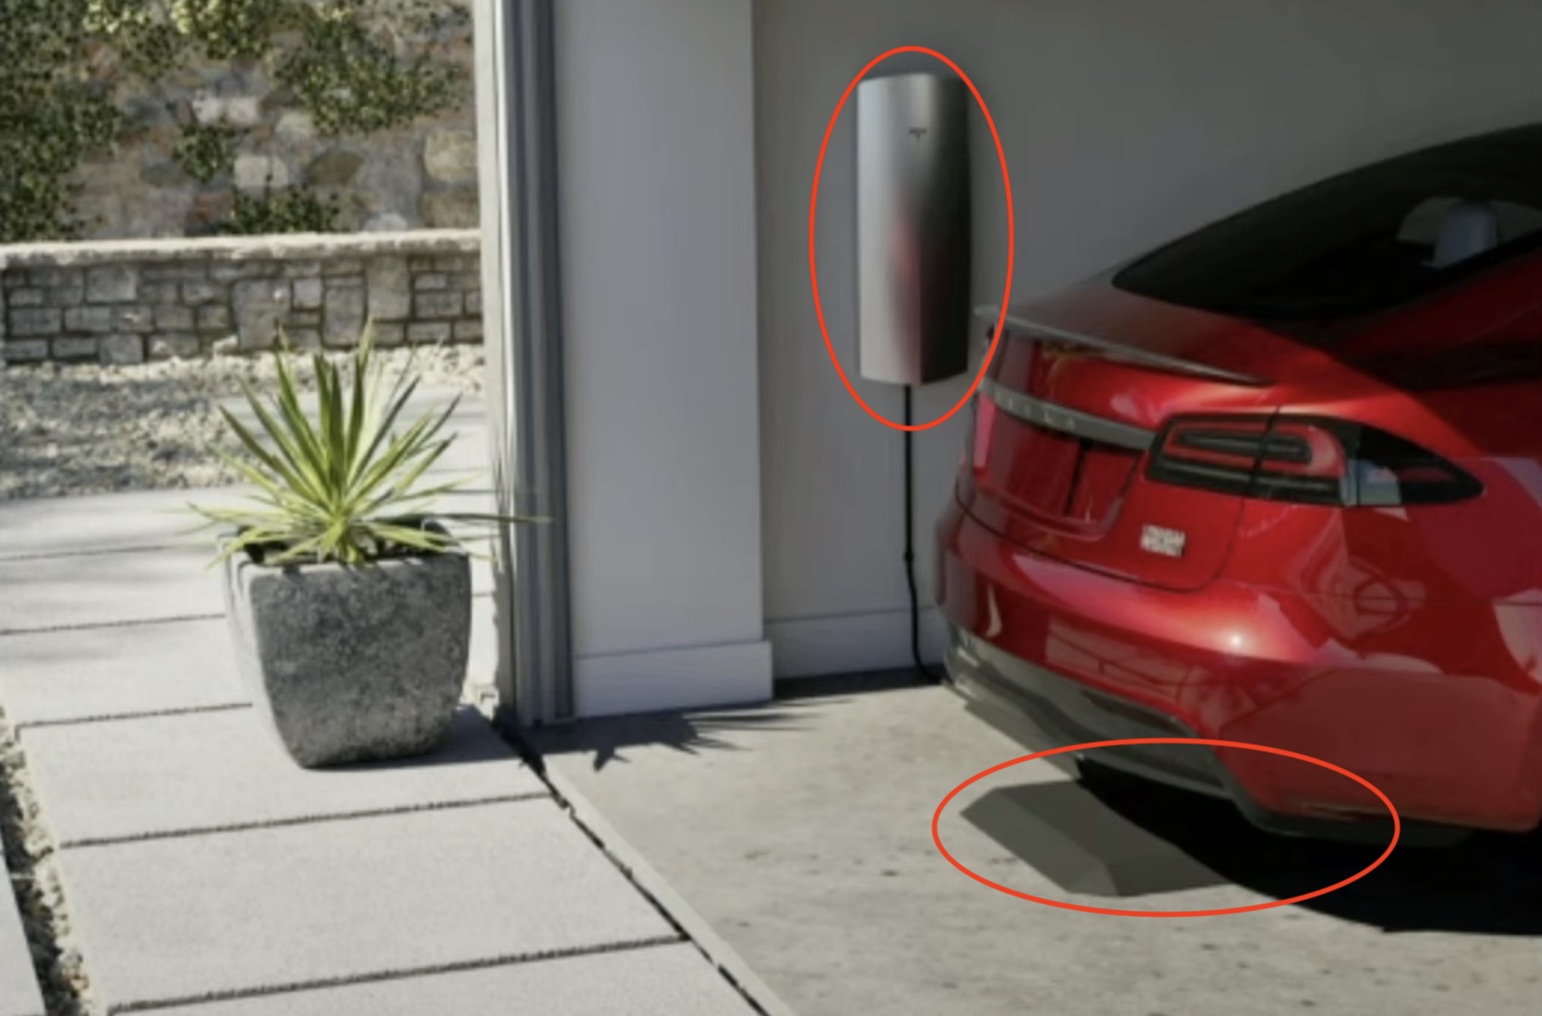 Tesla rumored to be purchasing wireless charging company Wiferion